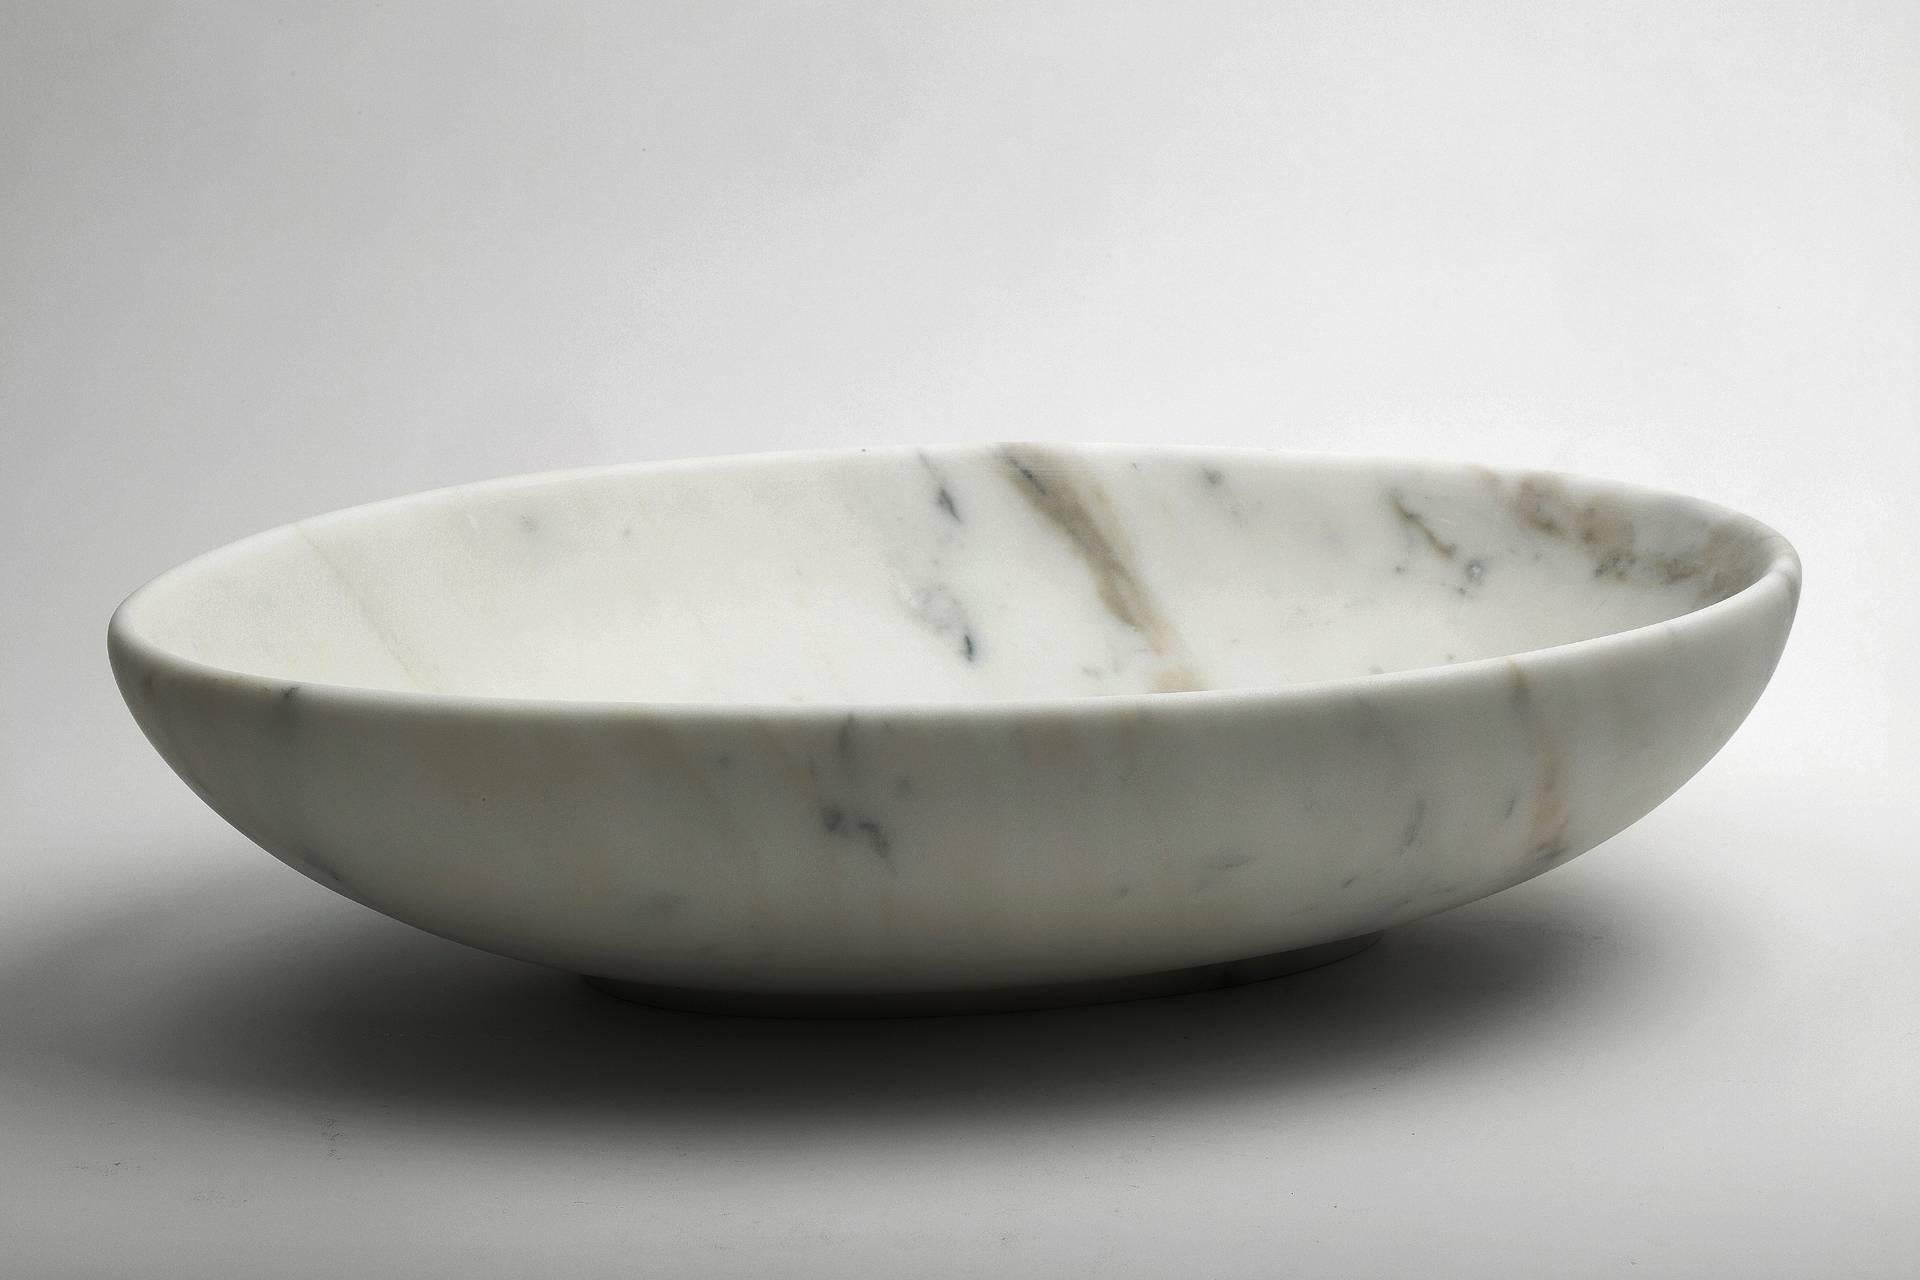 Big oval bowl in white Carrara marble. The object is a clean bowl without base. Each piece is in a way unique (since each marble block is different in veins and shades) and handmade by Italian artisans specialized over generations in processing the